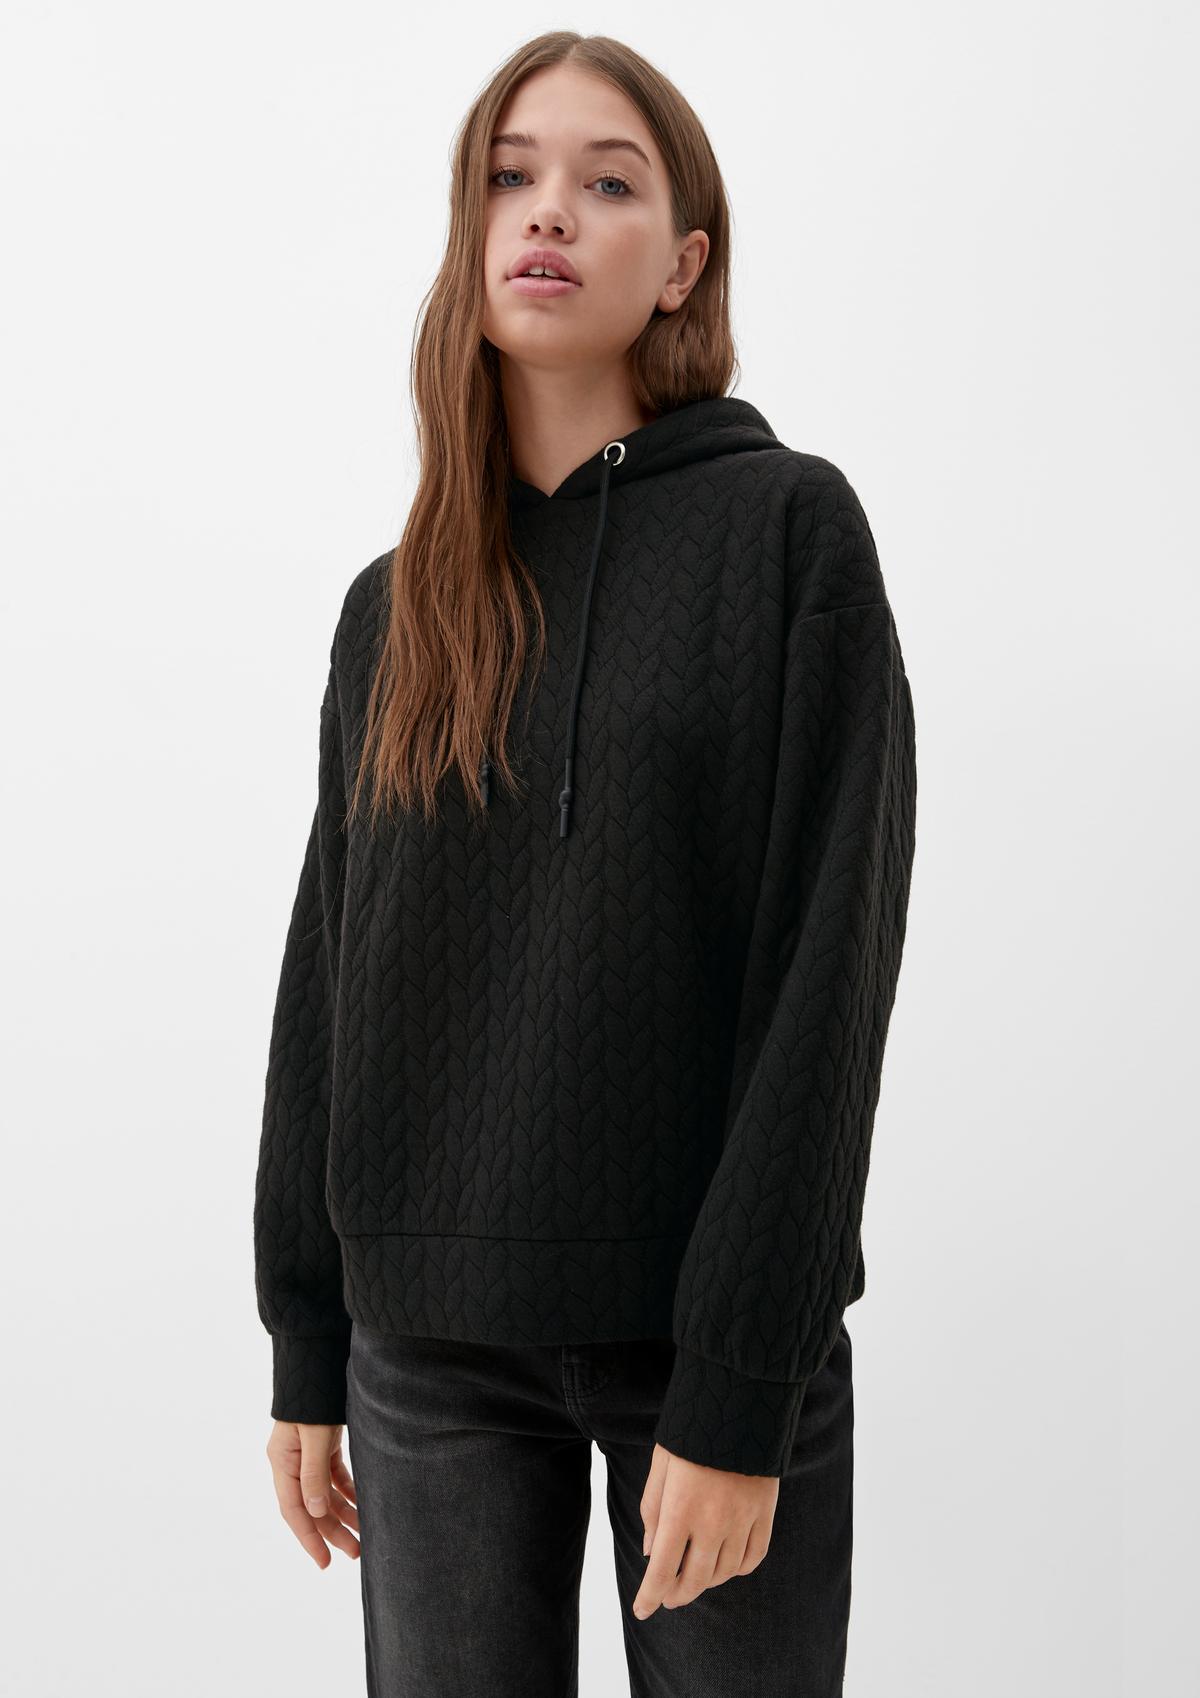 s.Oliver Sweatshirt with a patterned texture